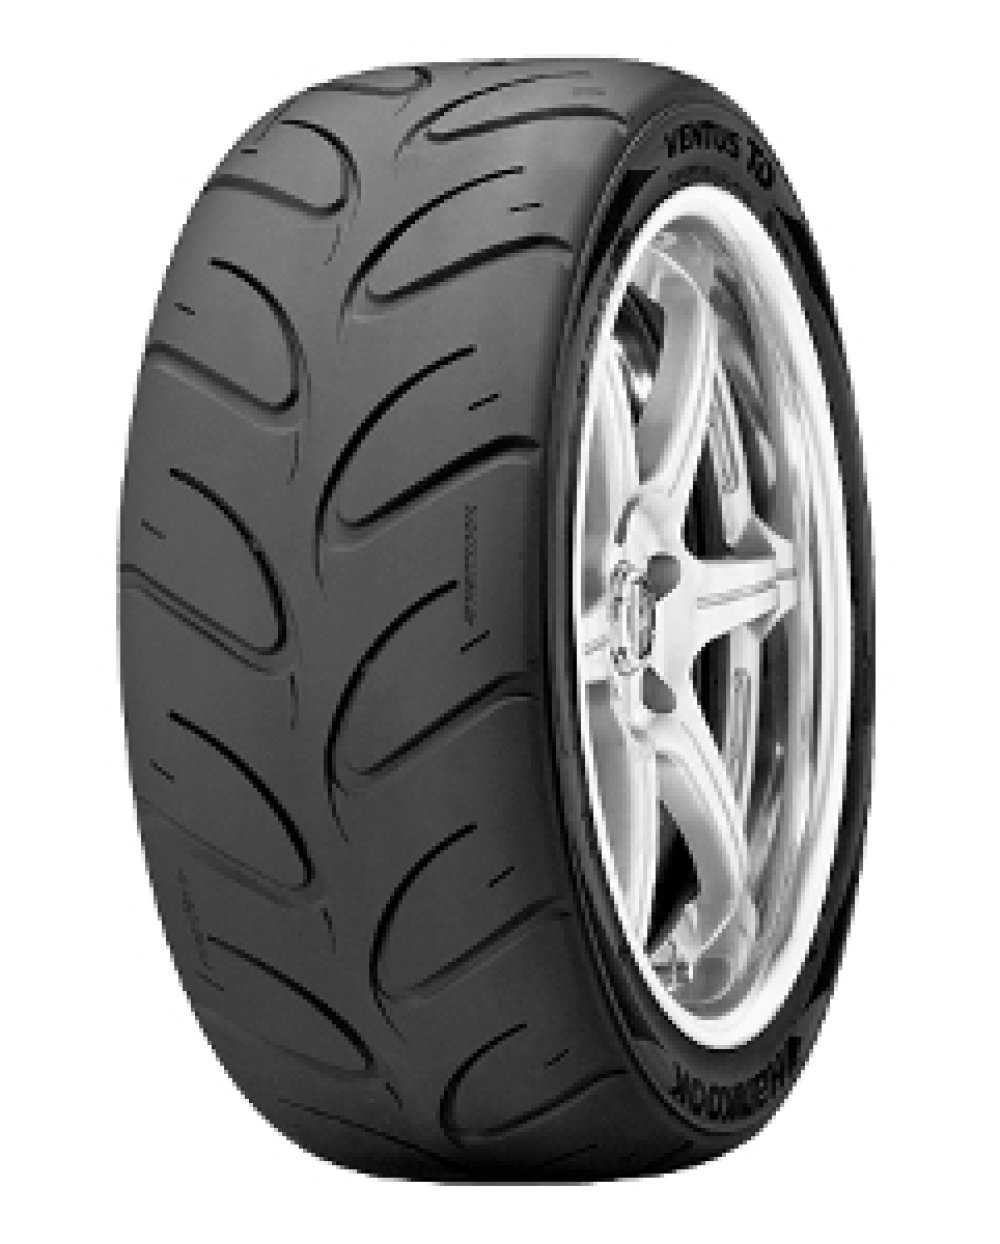 Image of        Hankook Ventus TD Z221 ( P225/35 R18 87Y XL 4PR *, Competition Use Only SBL )